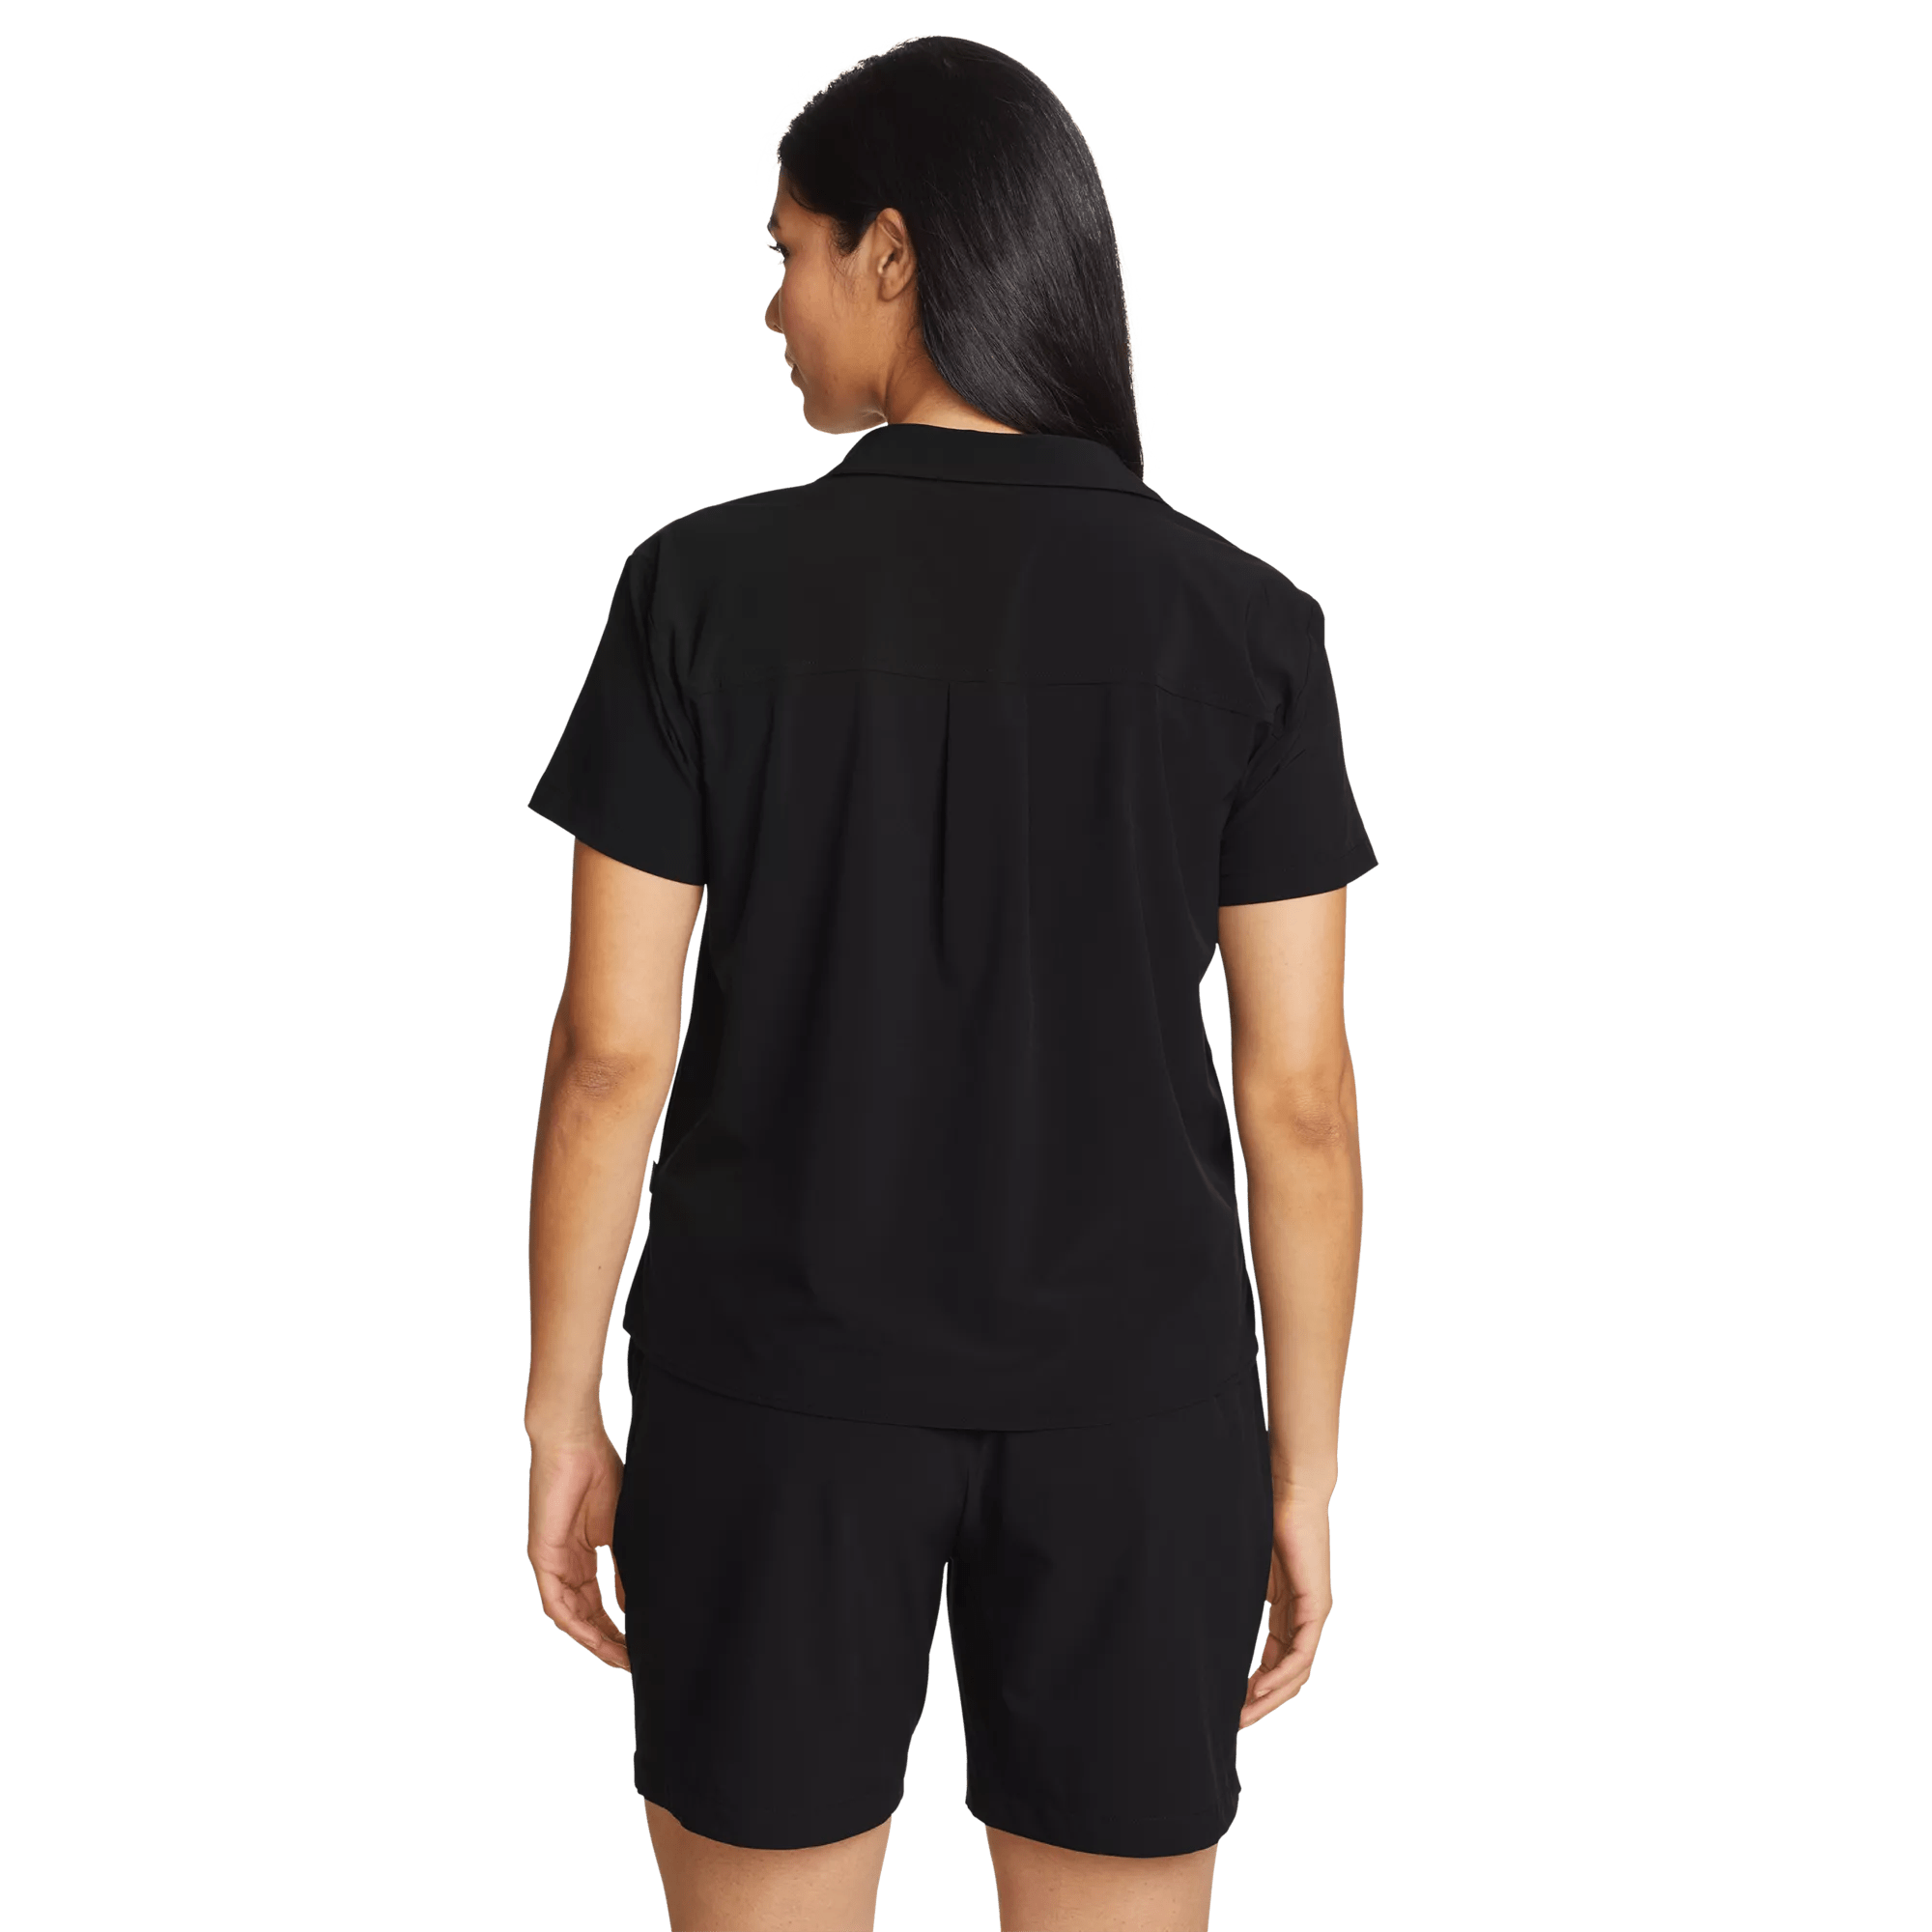 Departure Short-Sleeve Collared T-Shirt